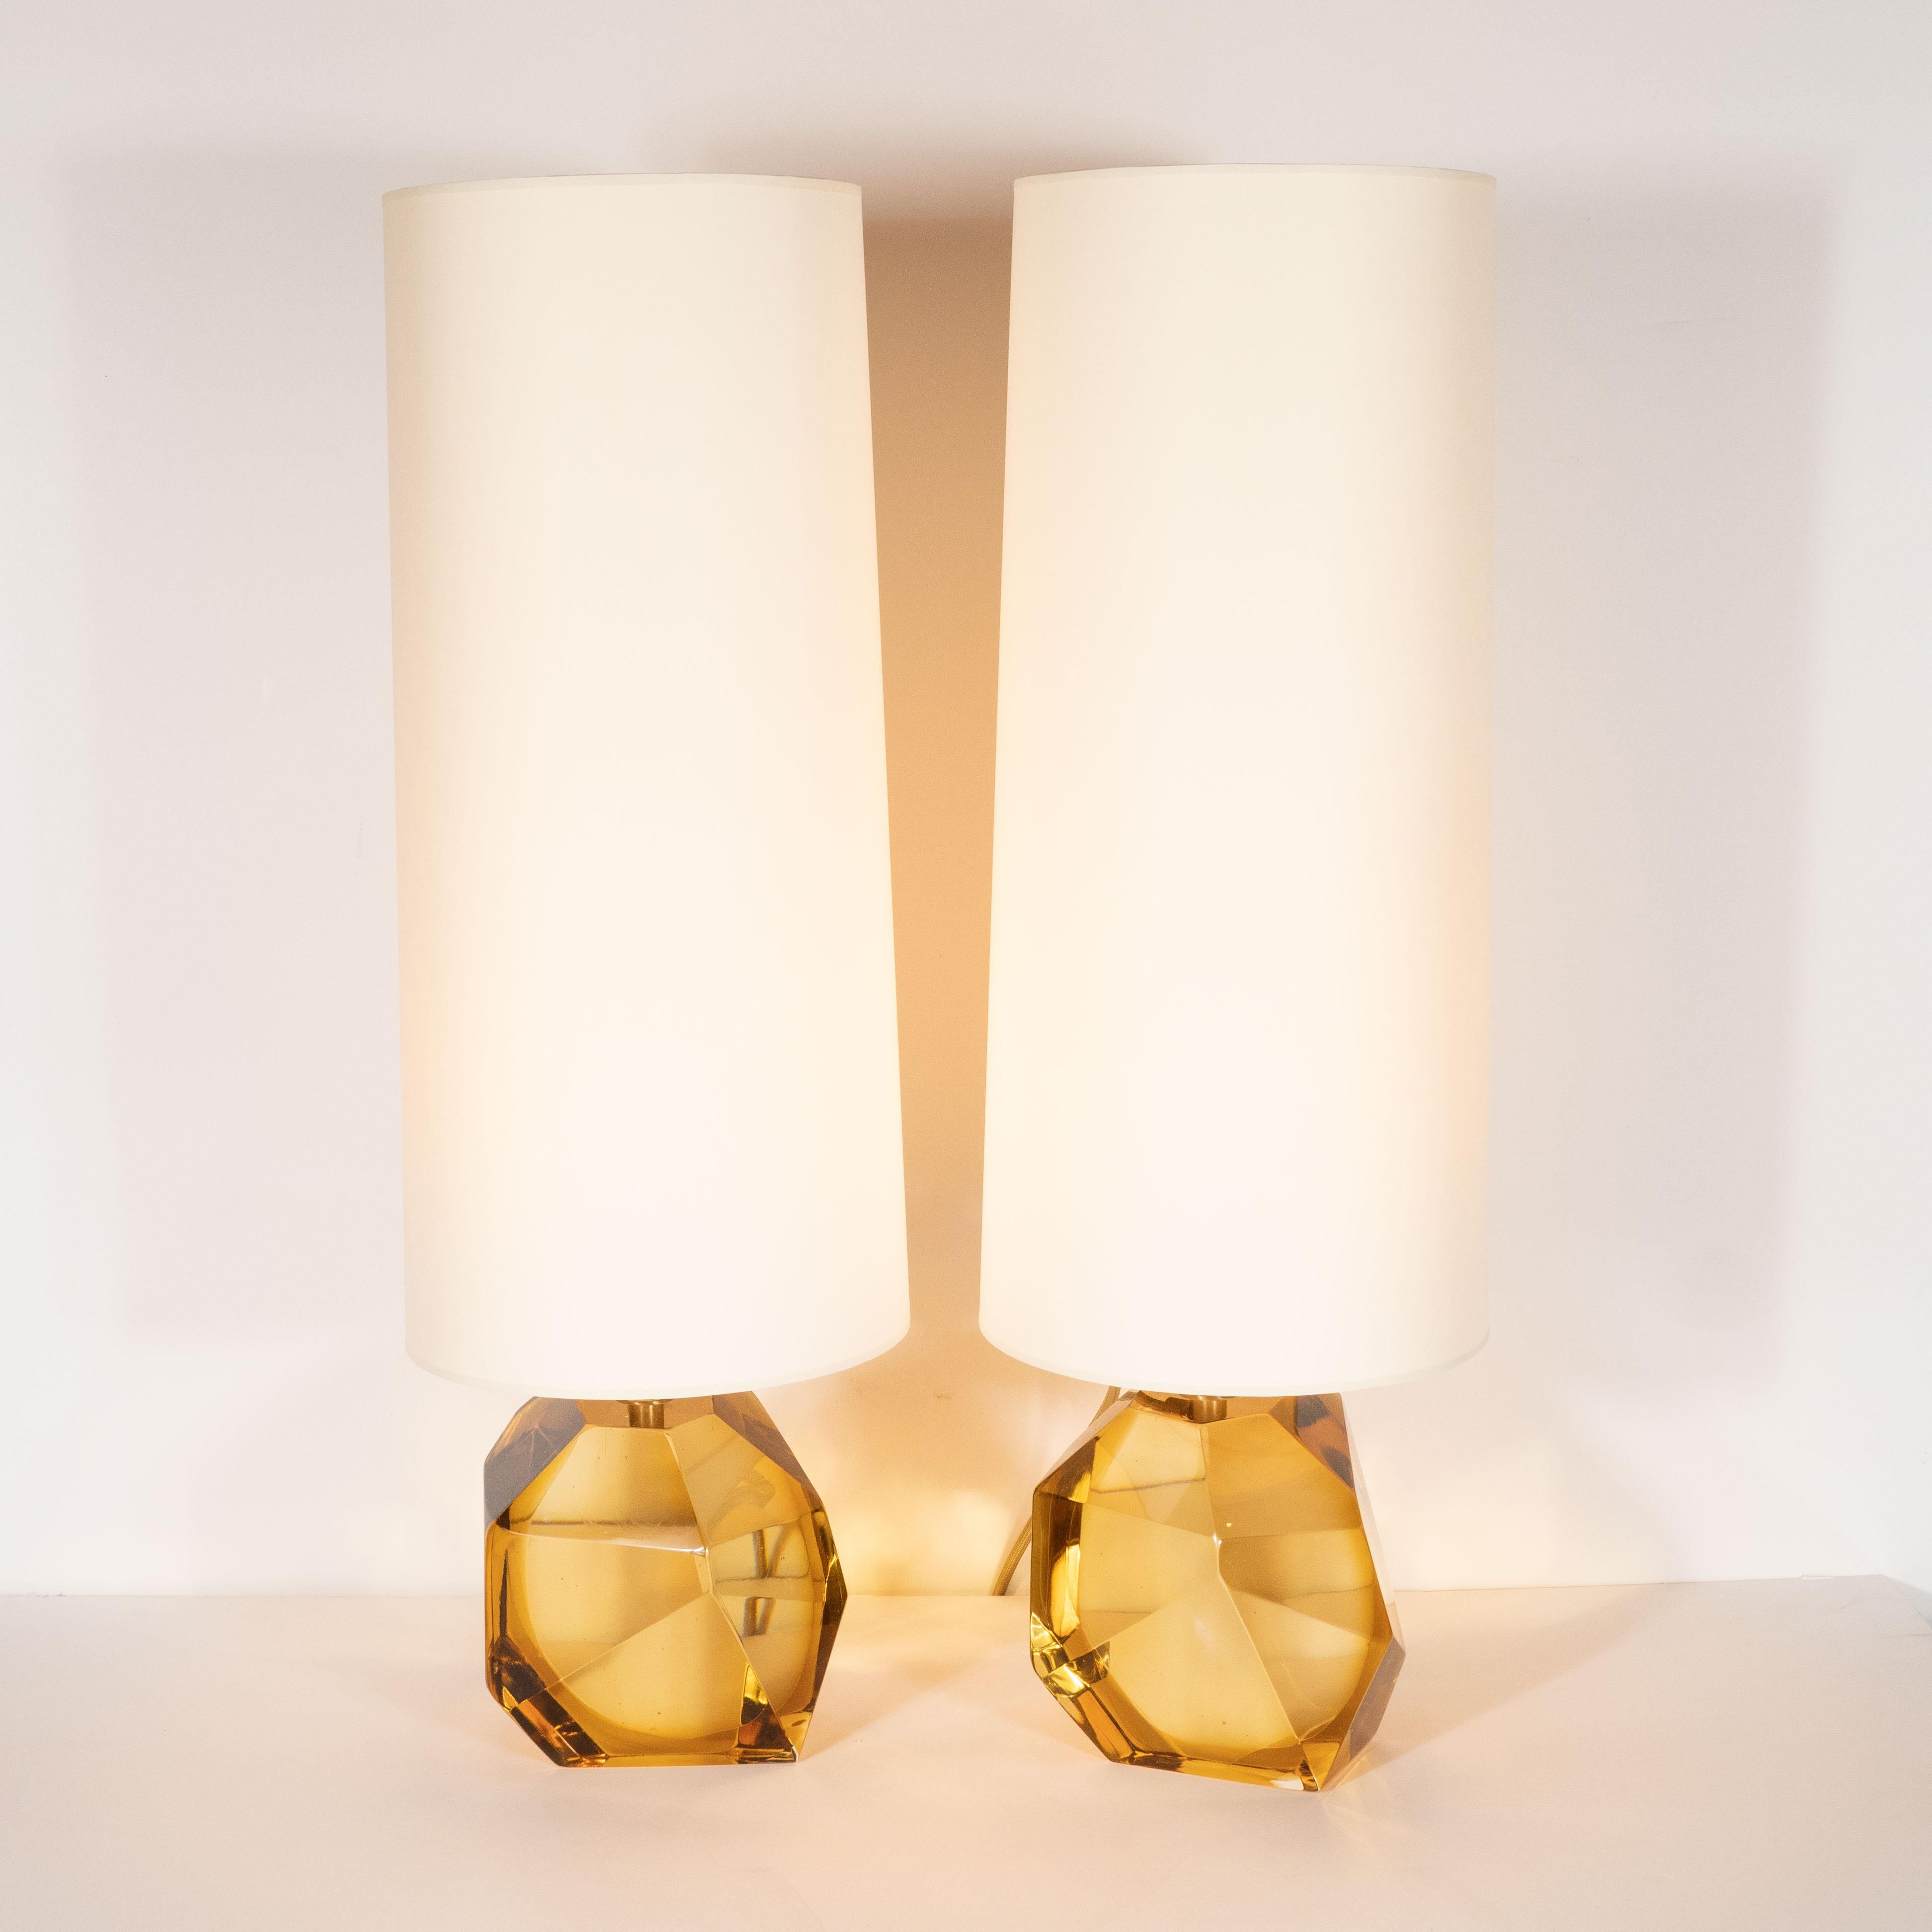 This stunning pair of table lamps were handblown in Murano, Italy- the islands off the coast of Venice renowned for centuries for their superlative glass production. They feature faceted bodies realized in handblown translucent Murano glass in a